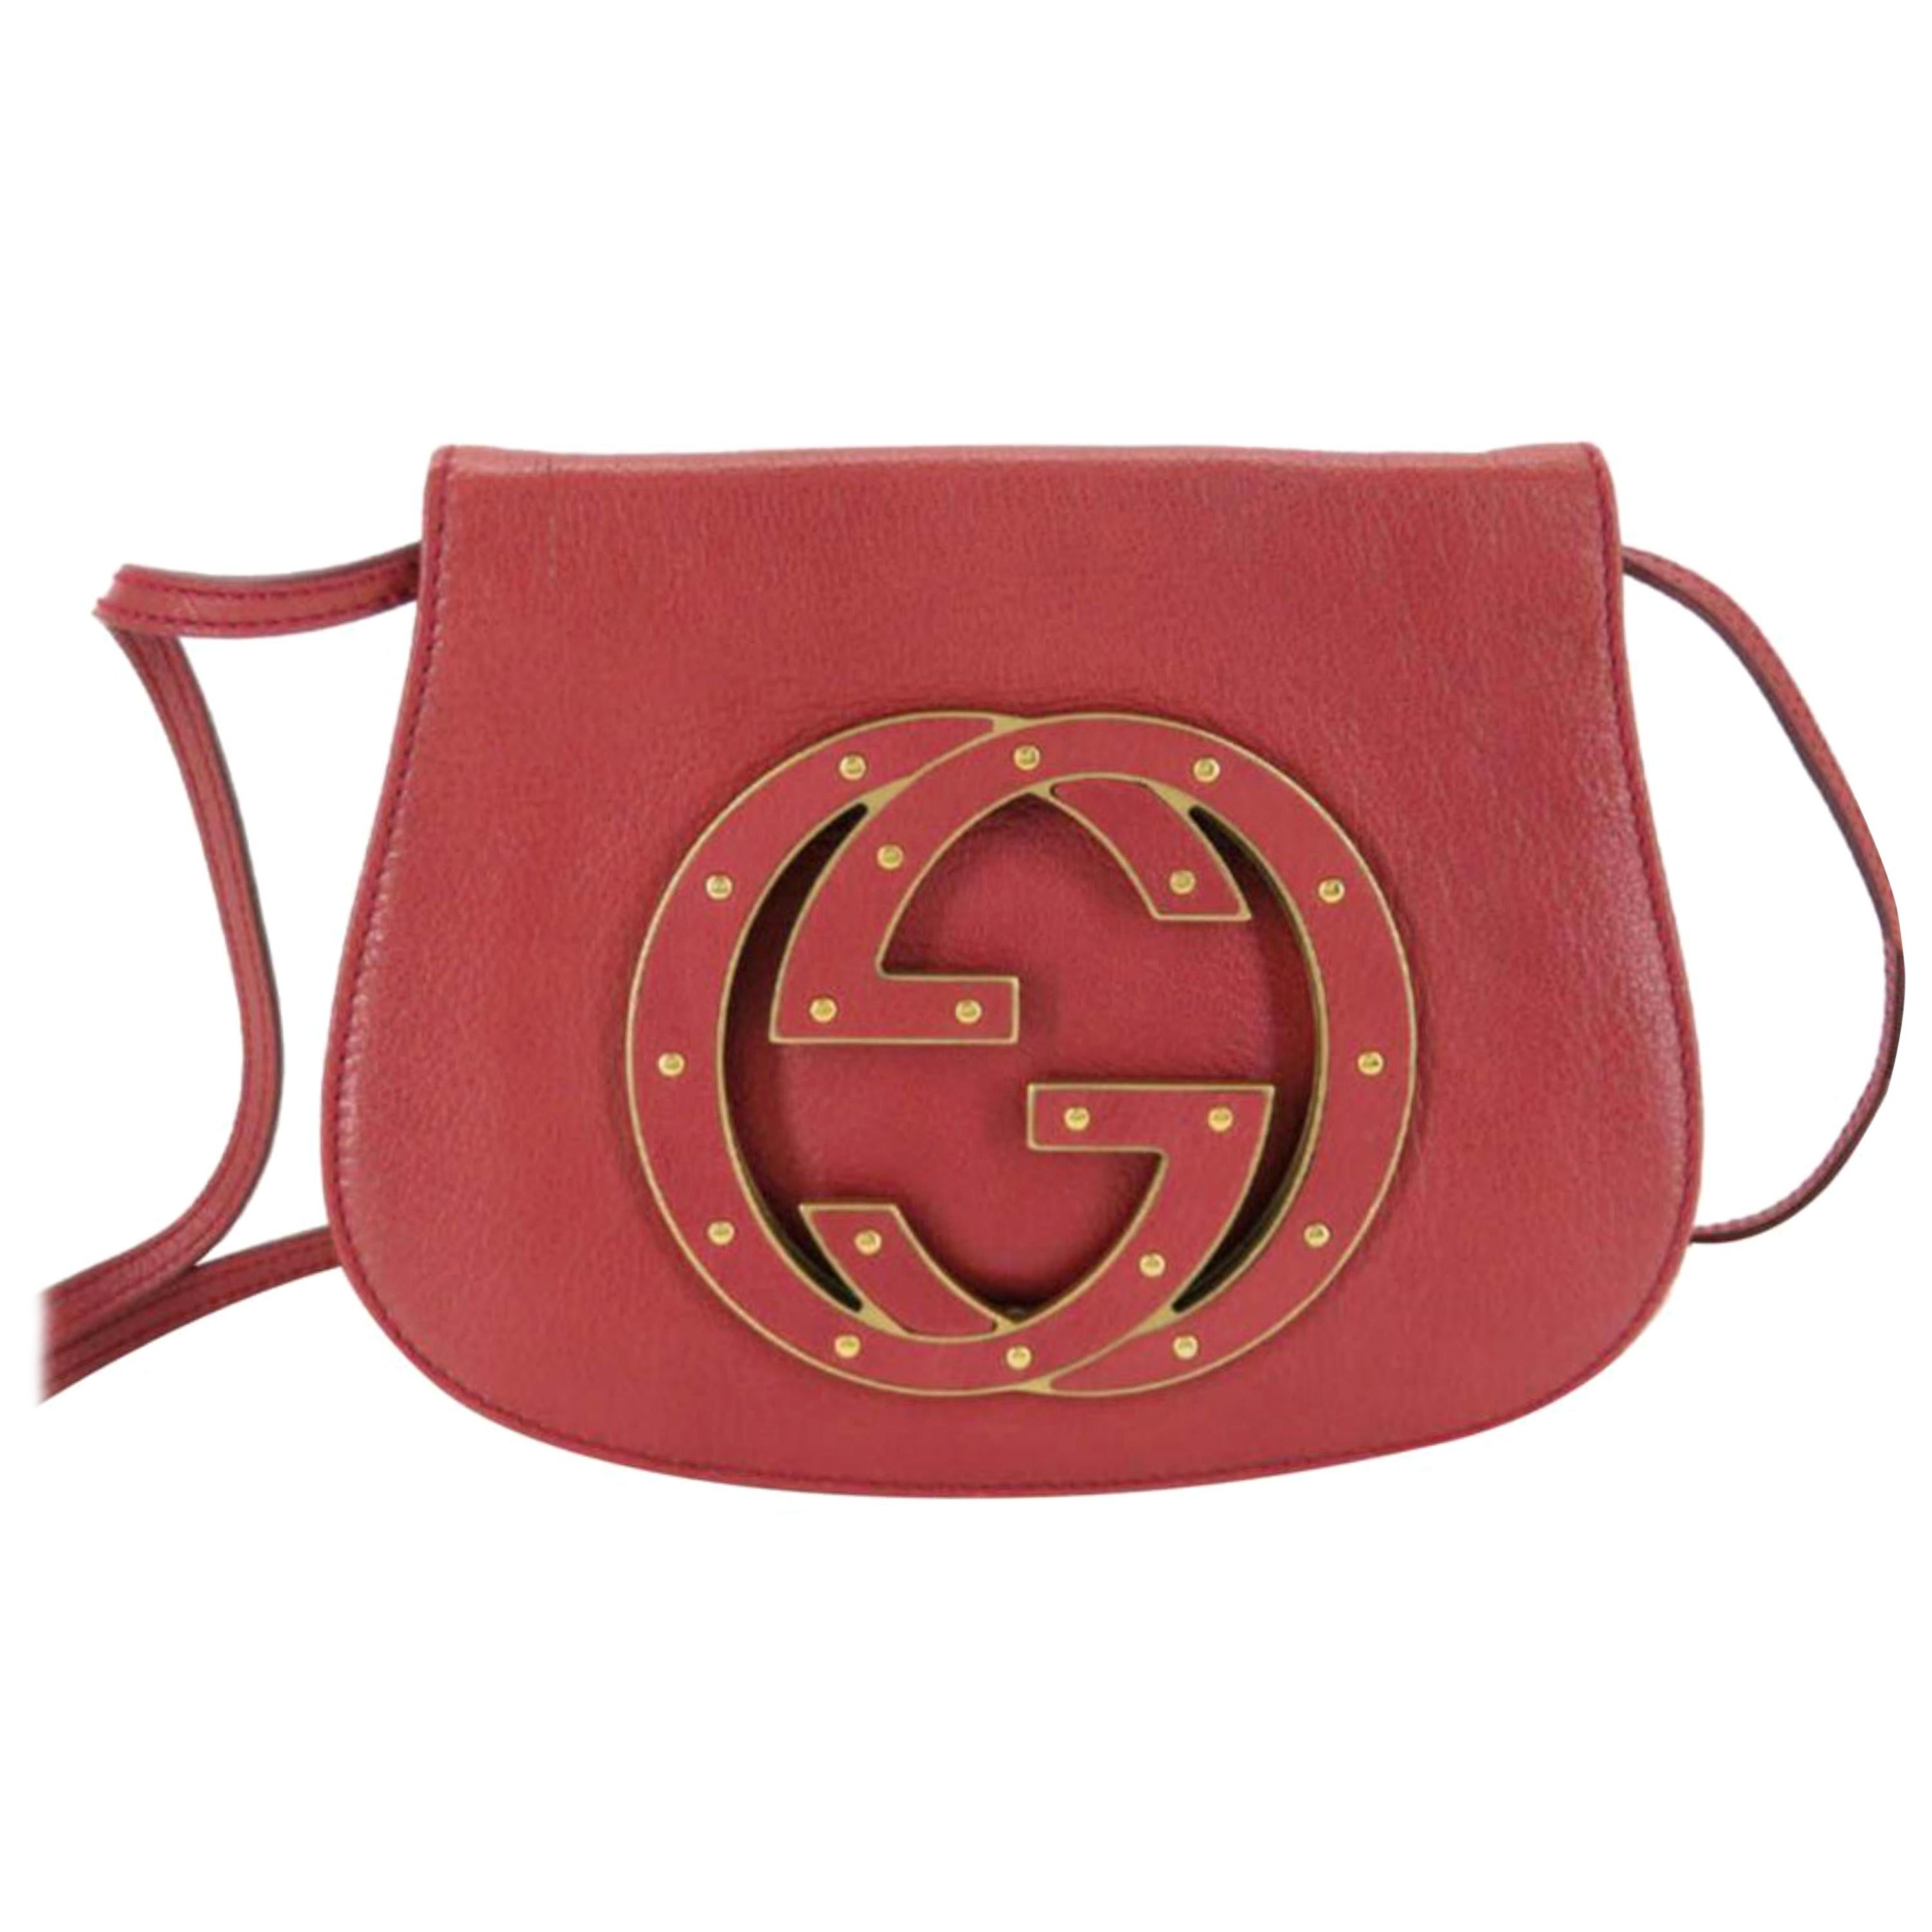 Gucci Soho Studded Messenger 870420 Red Leather Cross Body Bag For Sale